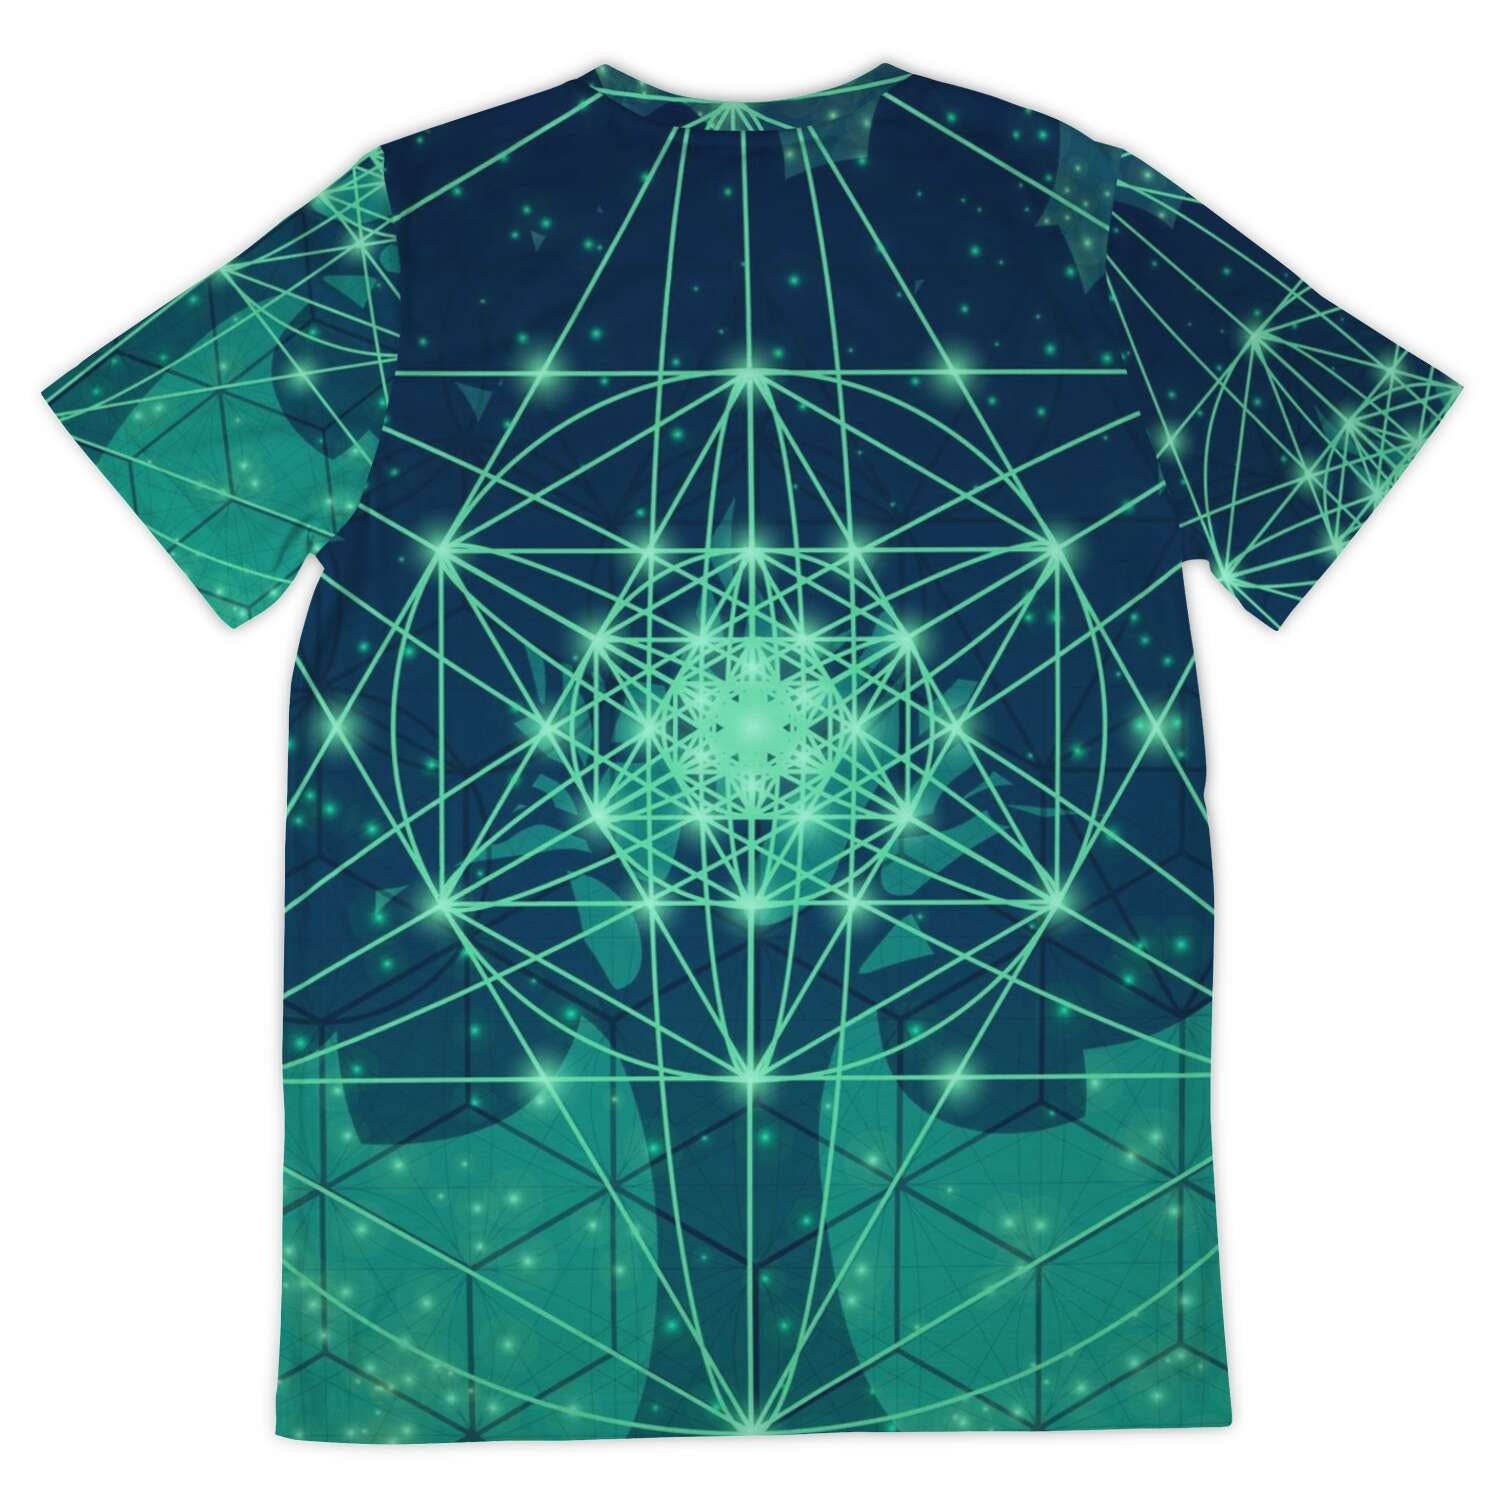 AOP T-Shirt Metatron's Cube Sacred Geometry (Flower of Life, Seed of Life Clothing, Golden Ratio) Graphic Art T-Shirt